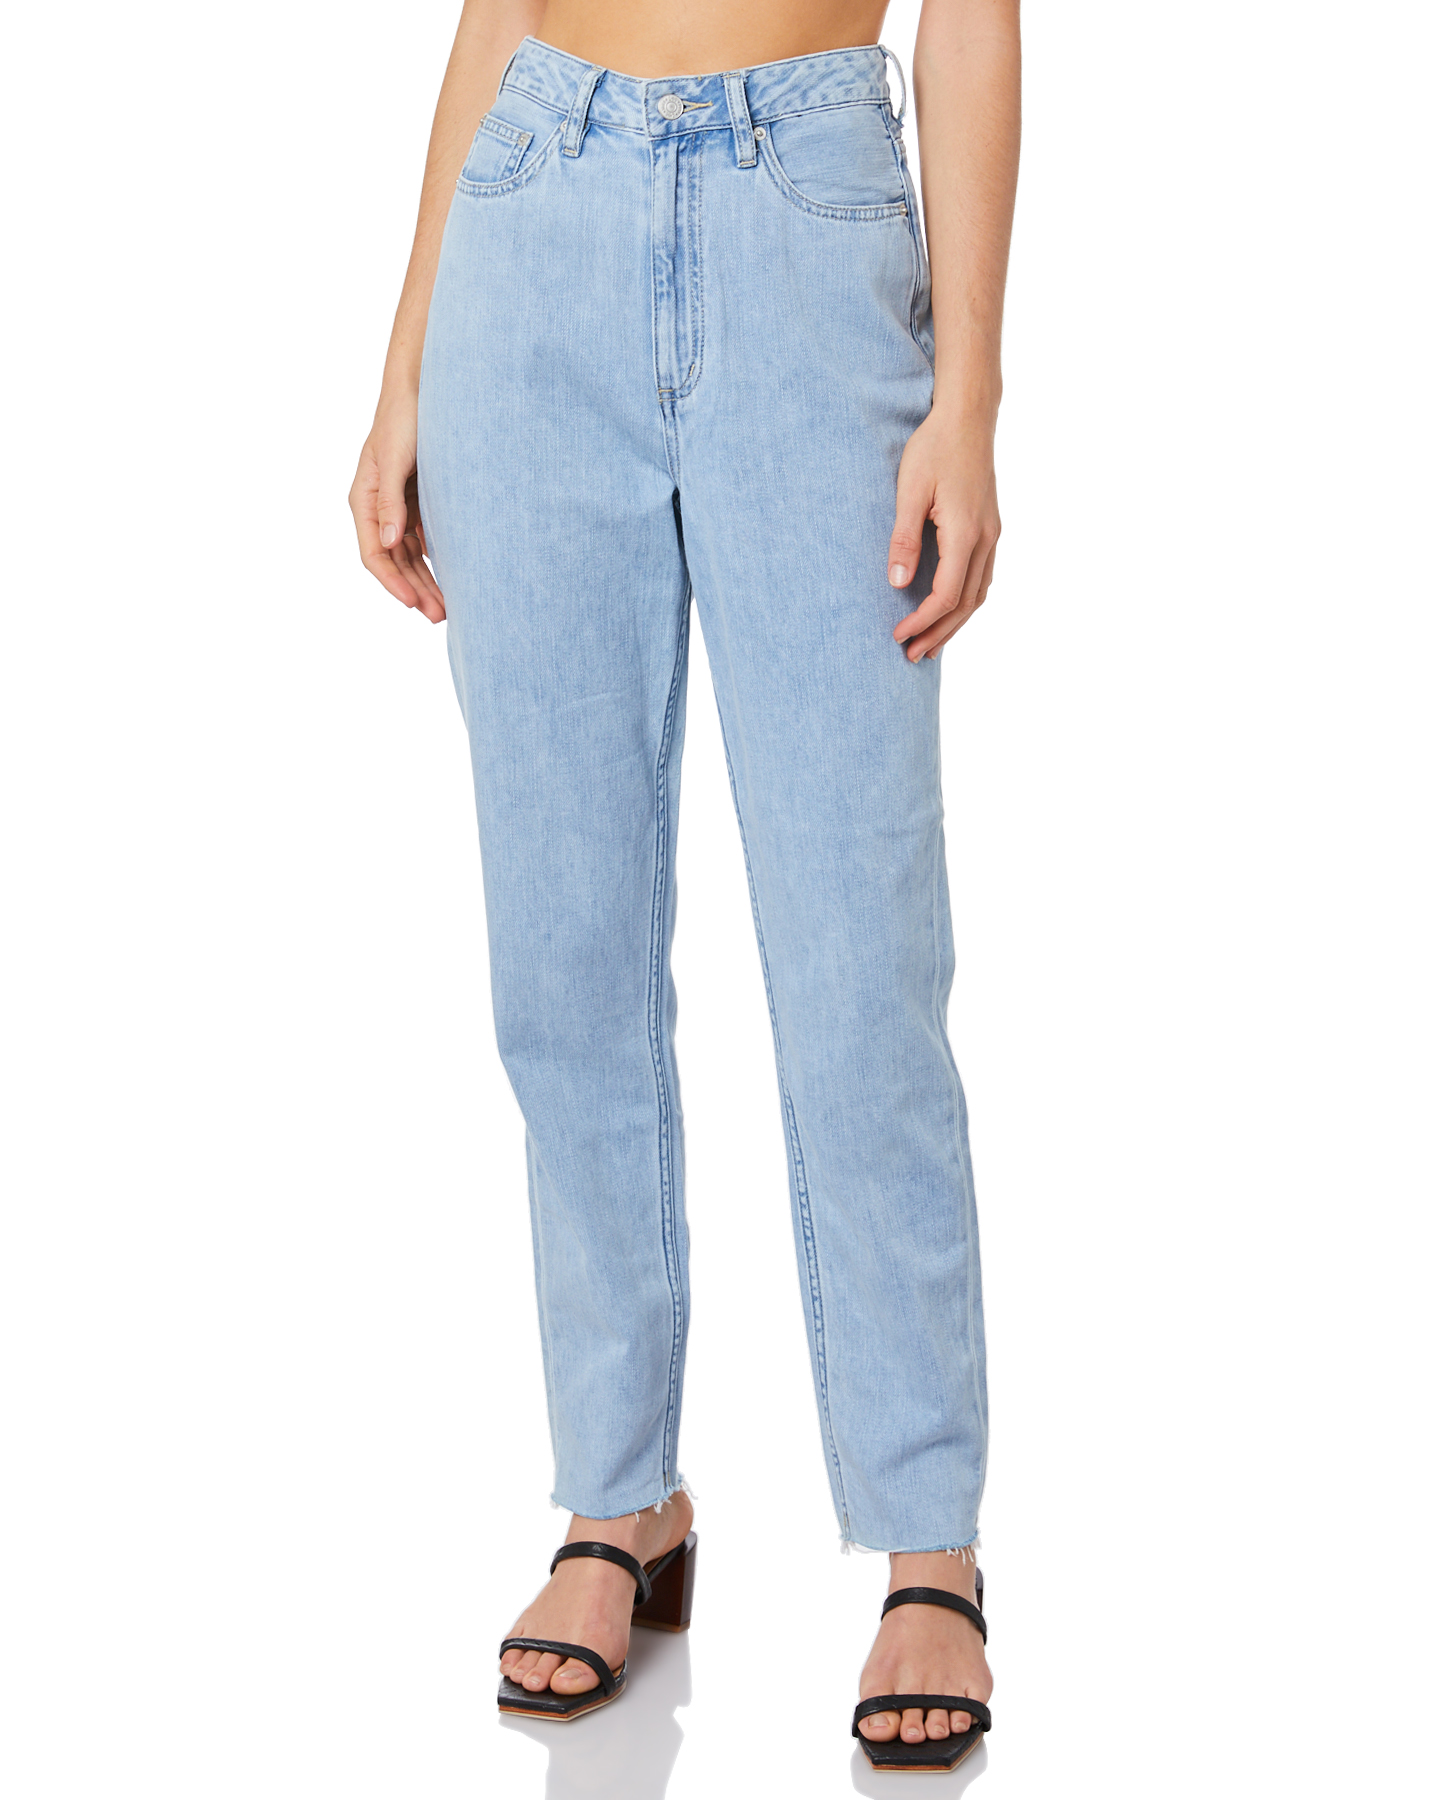 Lee High Mom Jean - Real Blue | SurfStitch